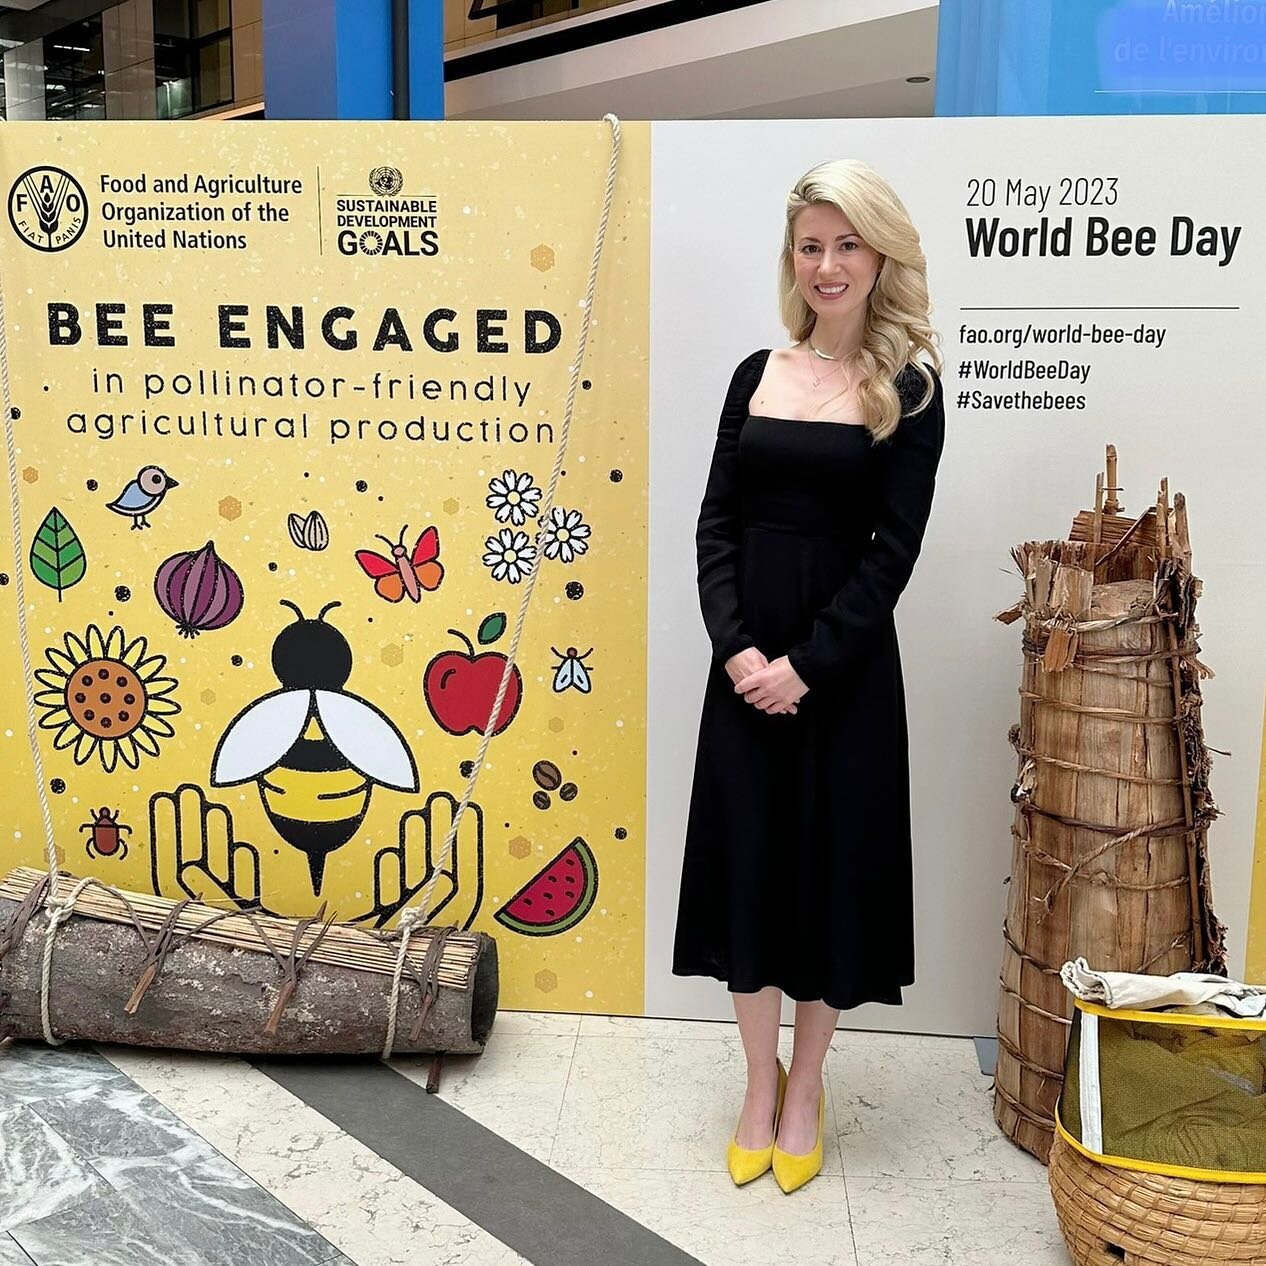 Happy World Bee Day from the Food and Agriculture Organization of the United Nations in Rome!

Thank you to everyone at @fao for the invitation to speak on behalf of bees and beekeepers at the biggest and best celebration of World Bee Day on the plan